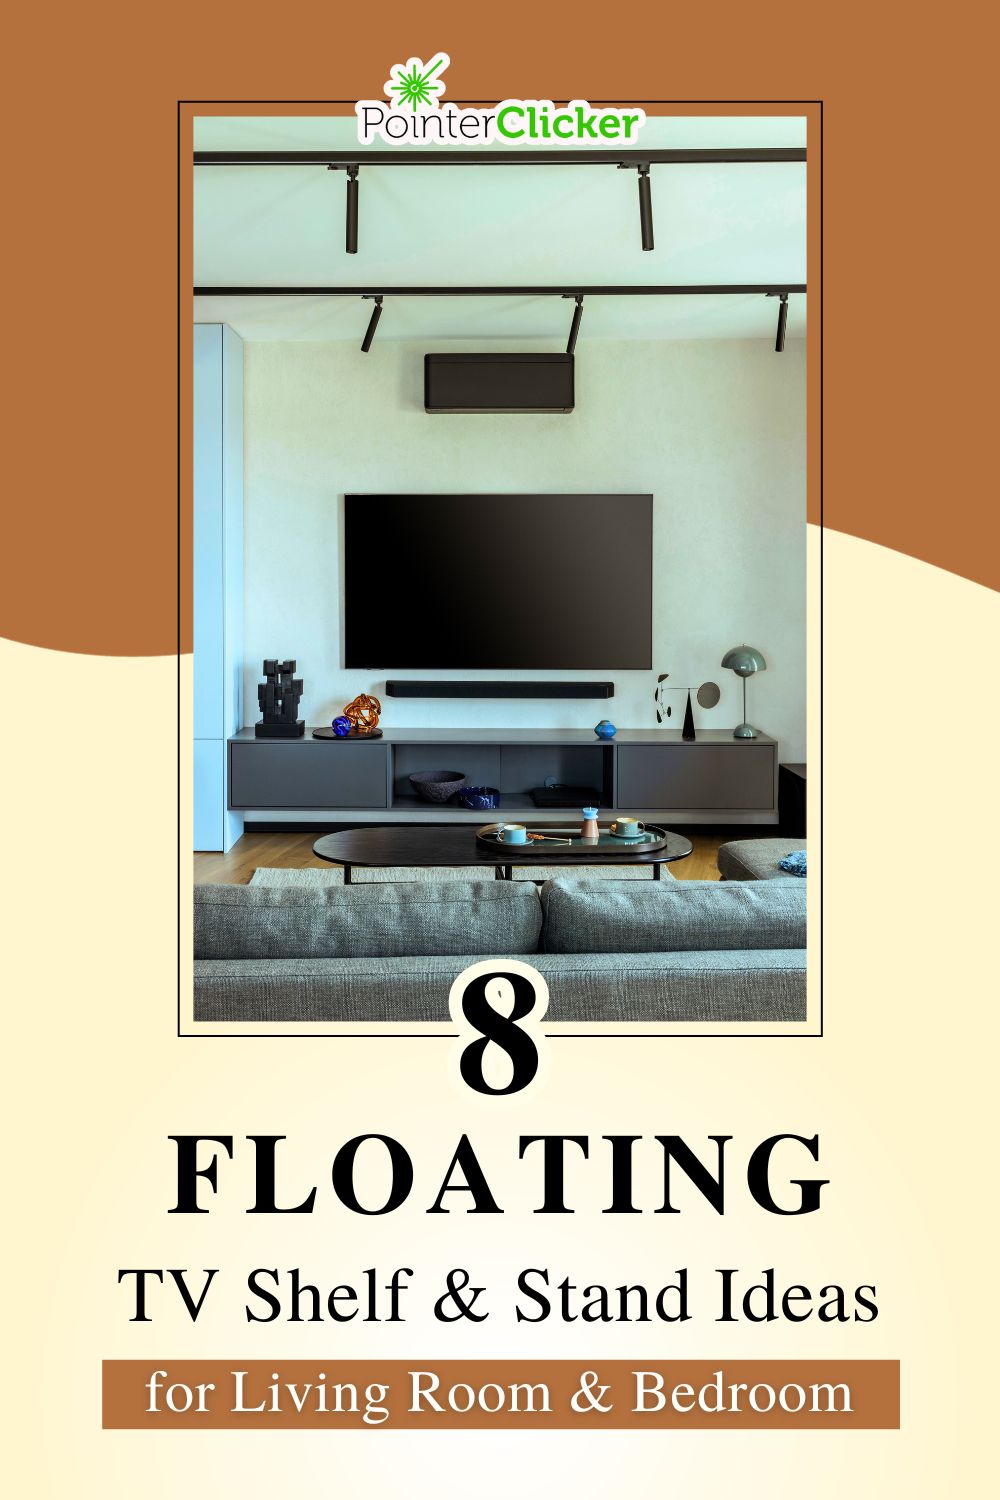 8 floating TV shelf and stand ideas for bedroom and living room